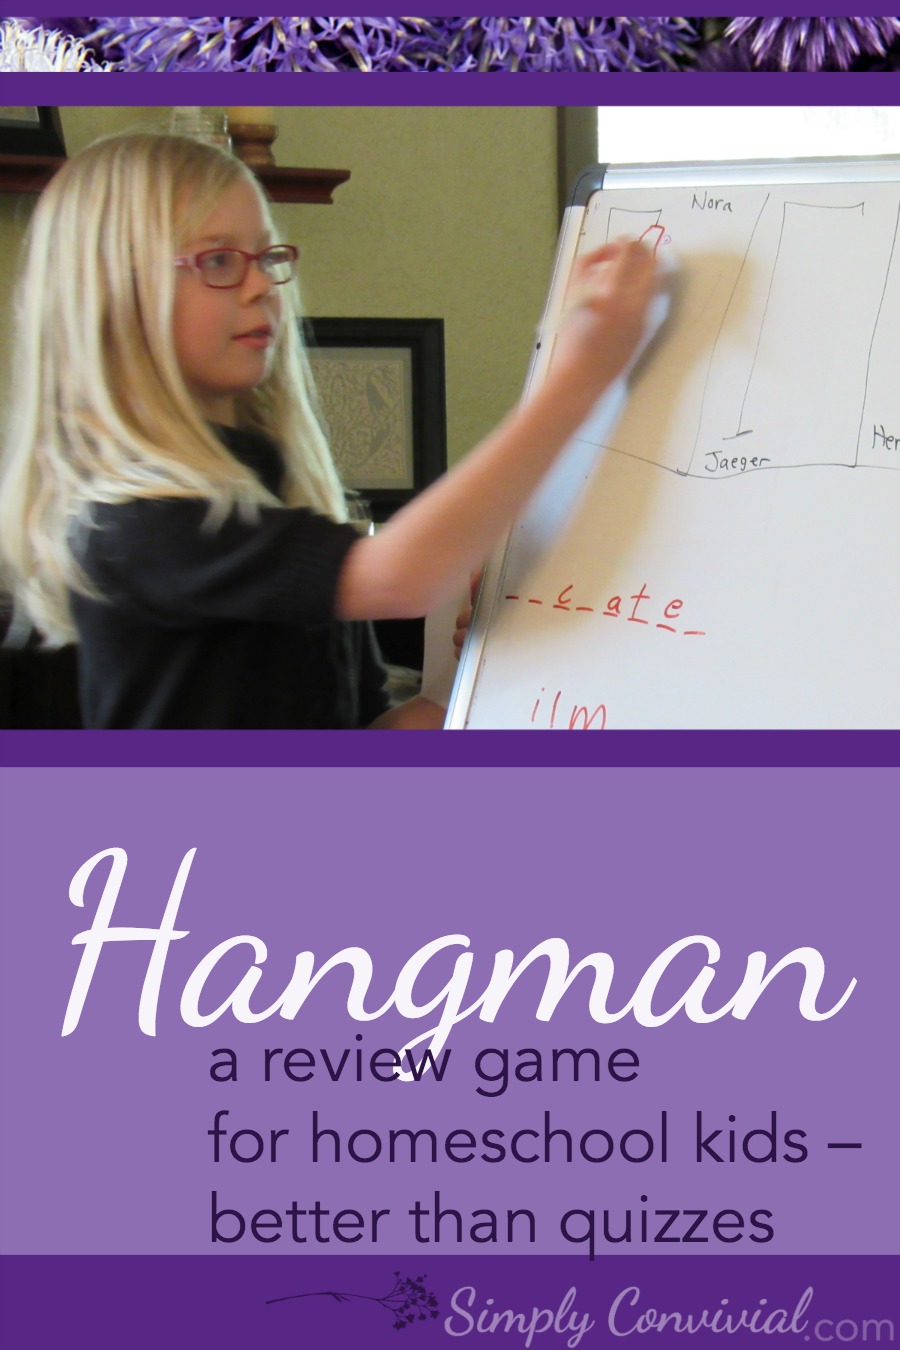 Hangman is a great review game to play with your homeschool class instead of comprehension tests or pop quizzes. Make review fun. Make them do the work.